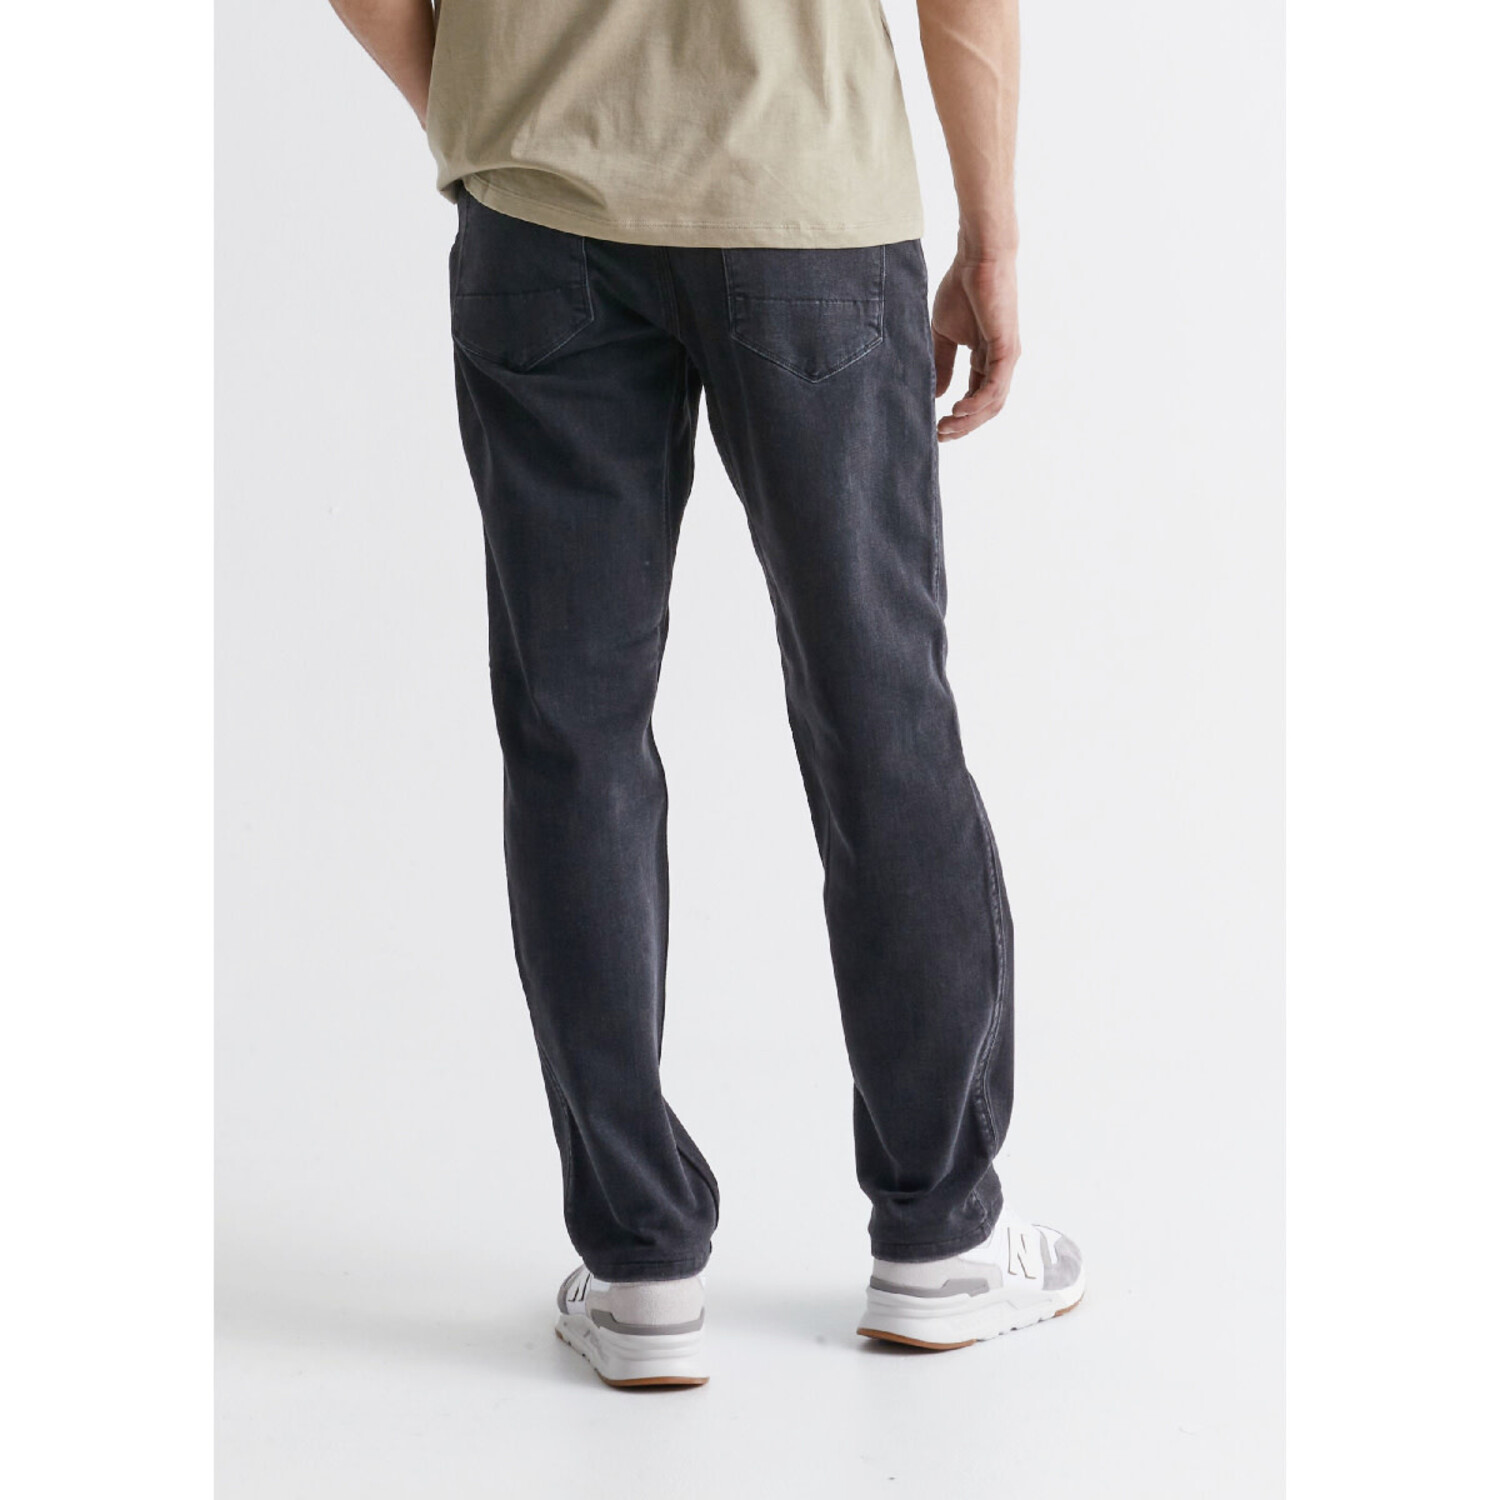 DUER Men's Performance Denim Athletic Straight (Discontinued